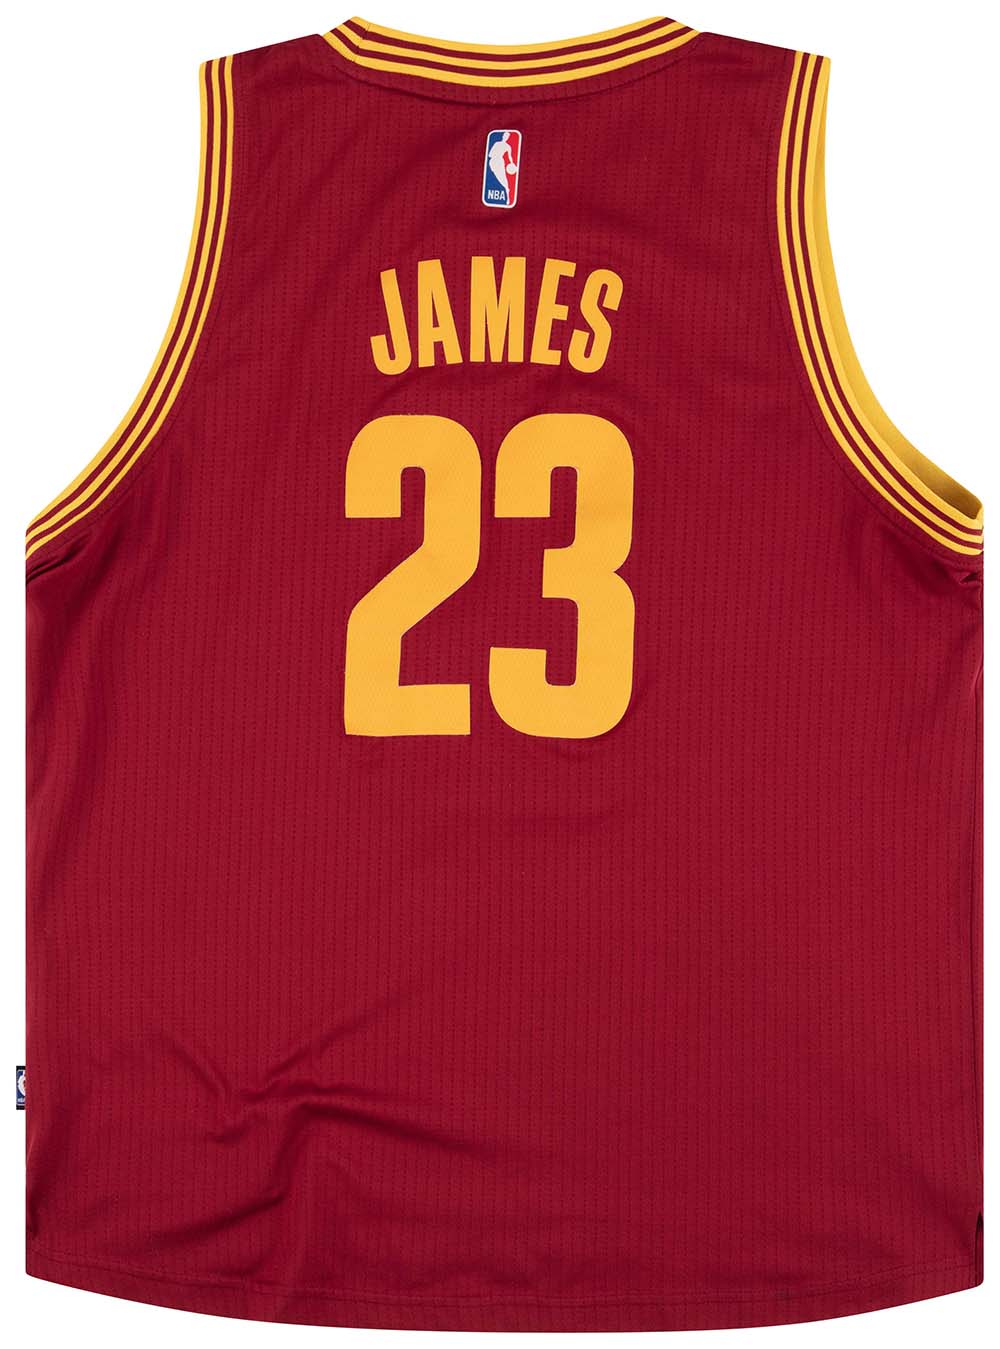 Vintage Adidas NBA Cleveland Cavaliers LeBron James #23 Jersey Size Youth L.